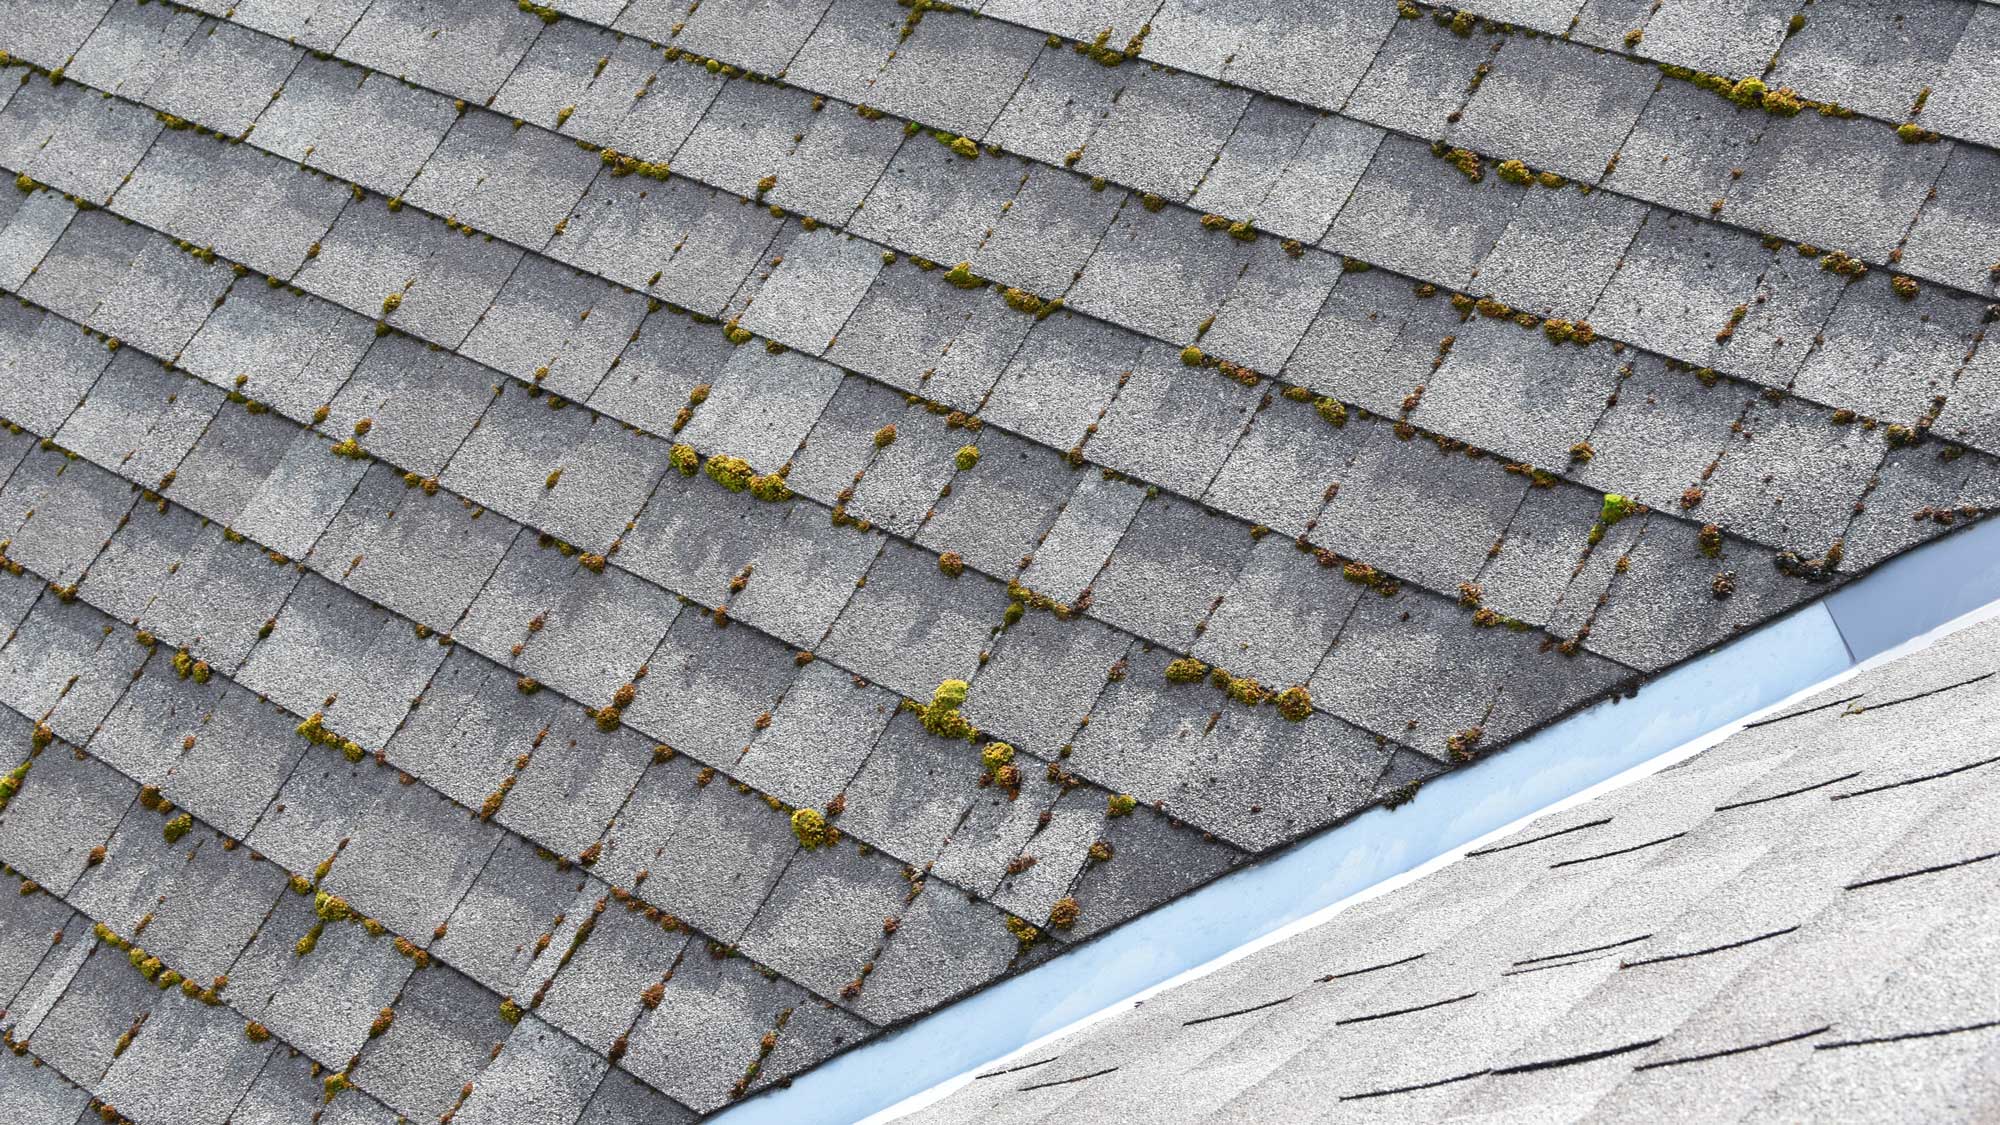 Roof damage, moss growing between shingles, on a Colorado roof.